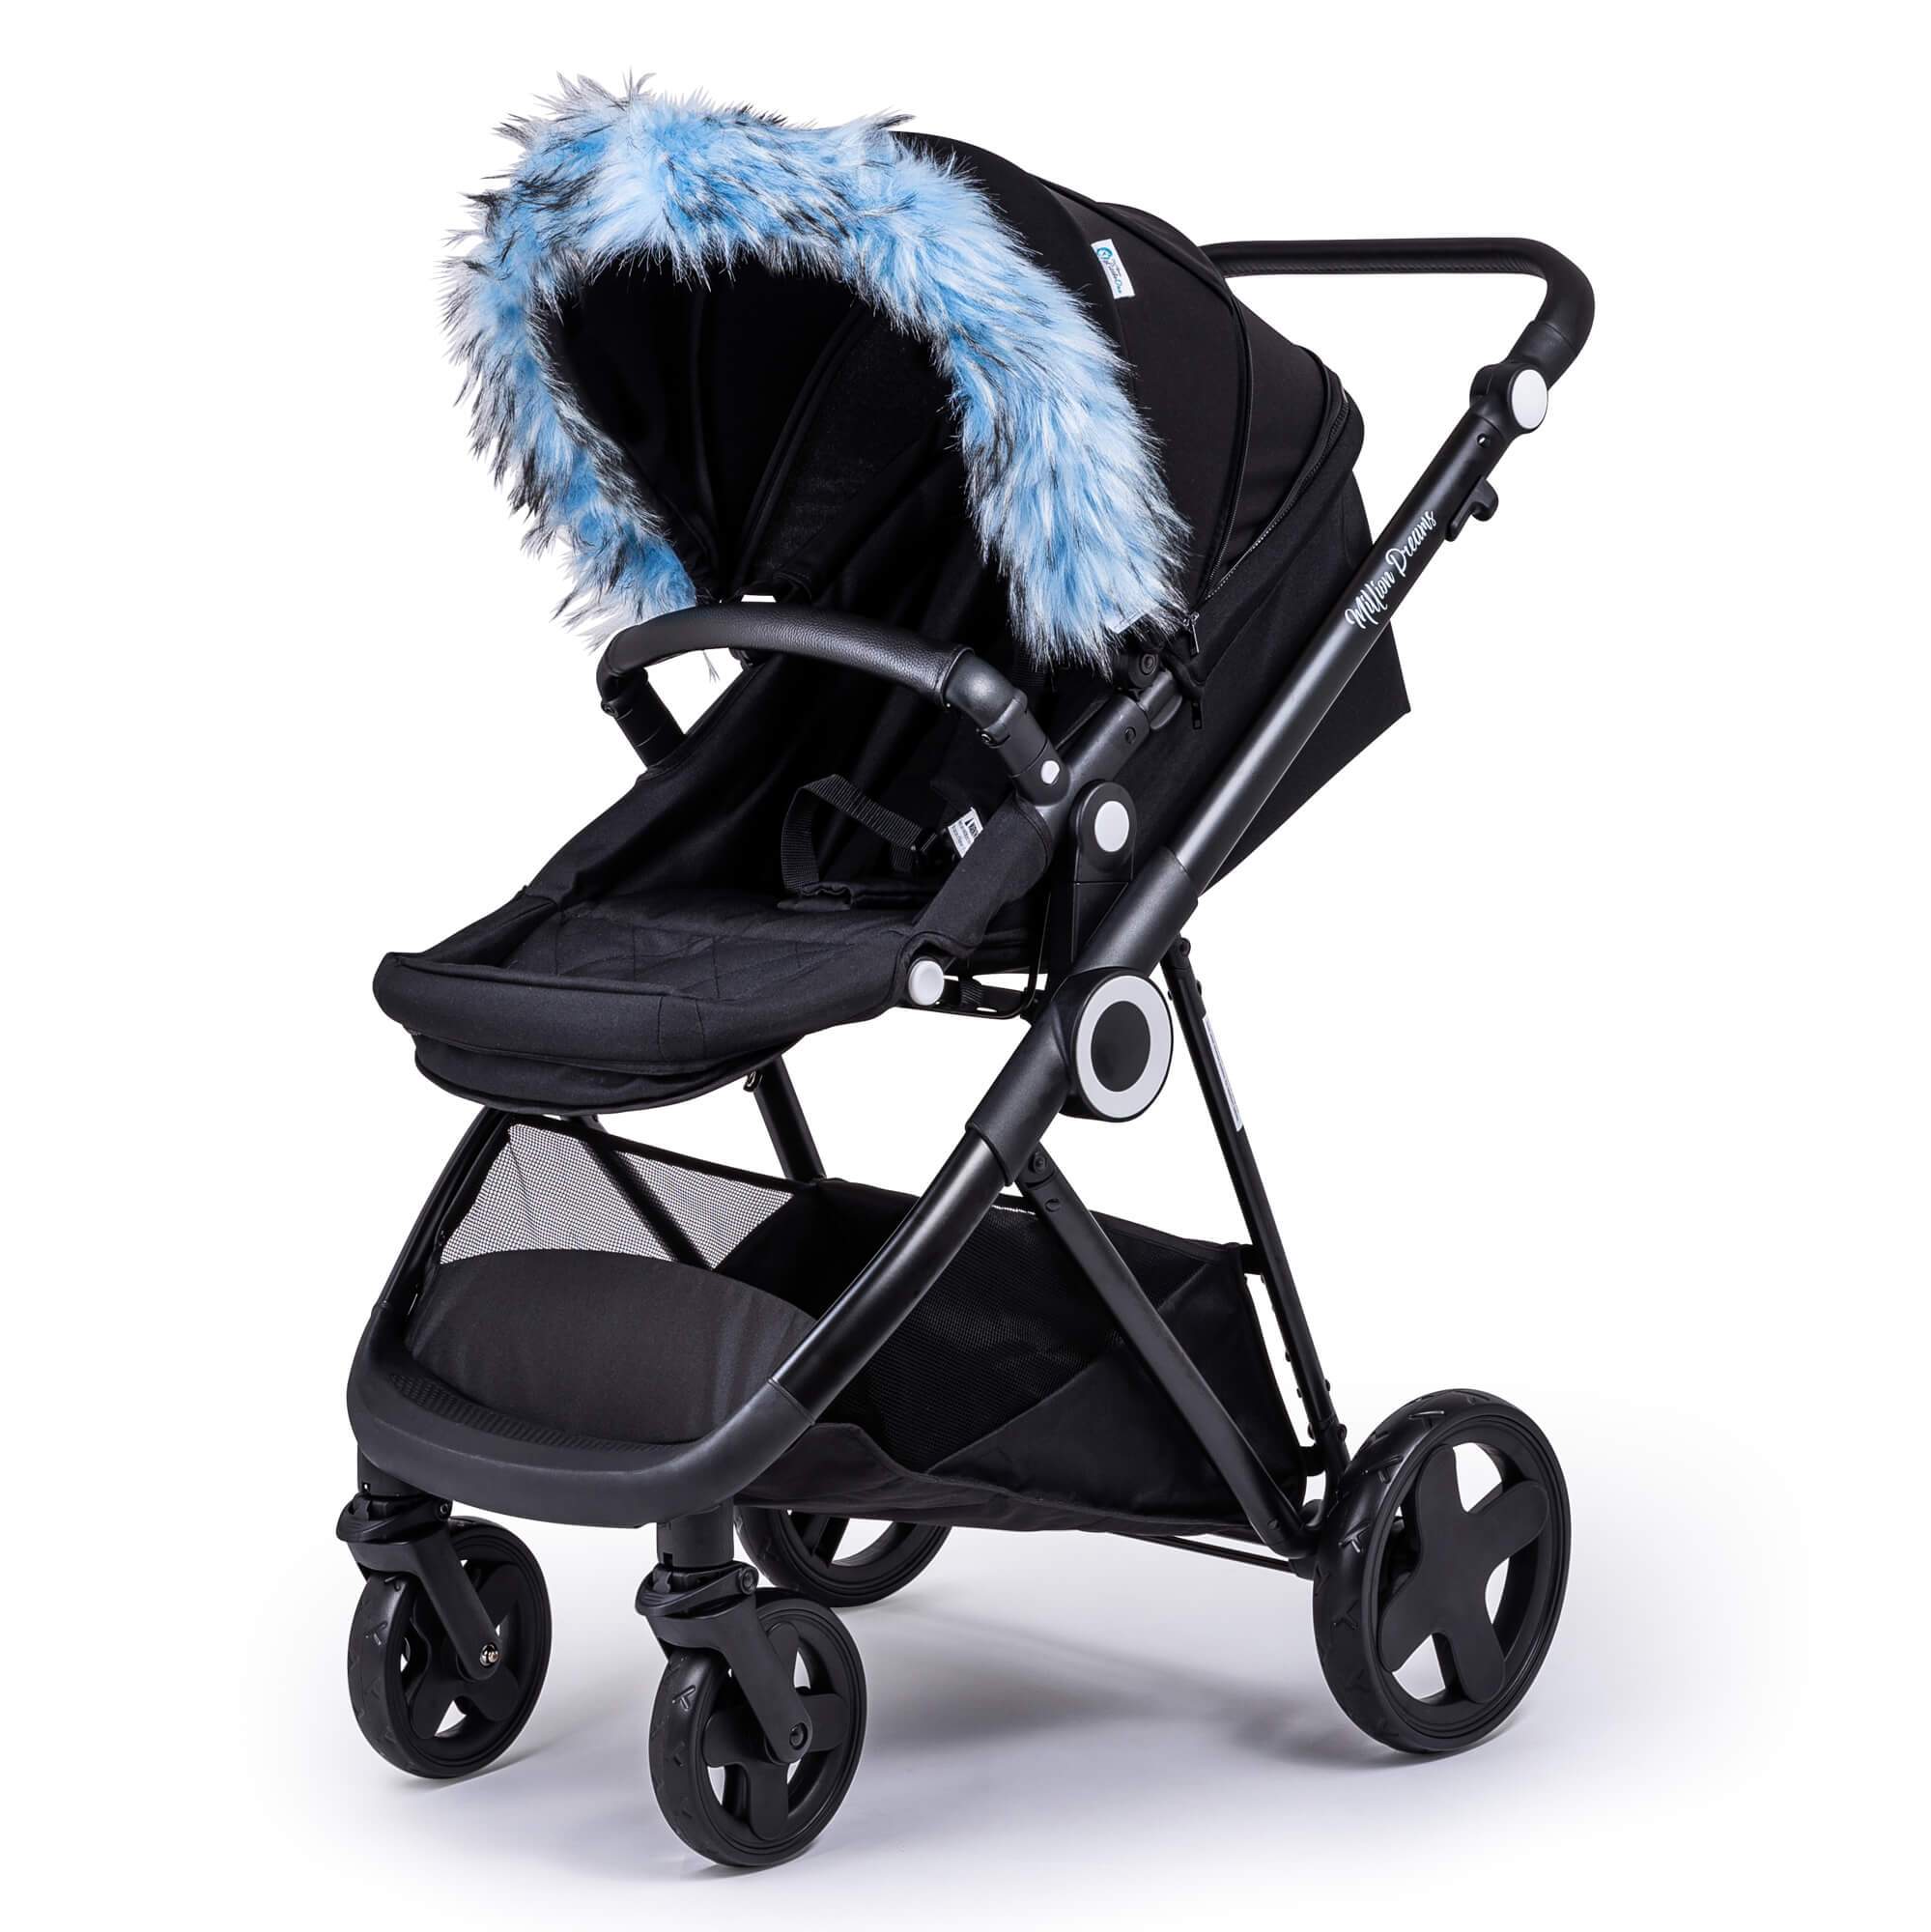 Pram Fur Hood Trim Attachment for Pushchair Compatible with Valco - Light Blue / Fits All Models | For Your Little One